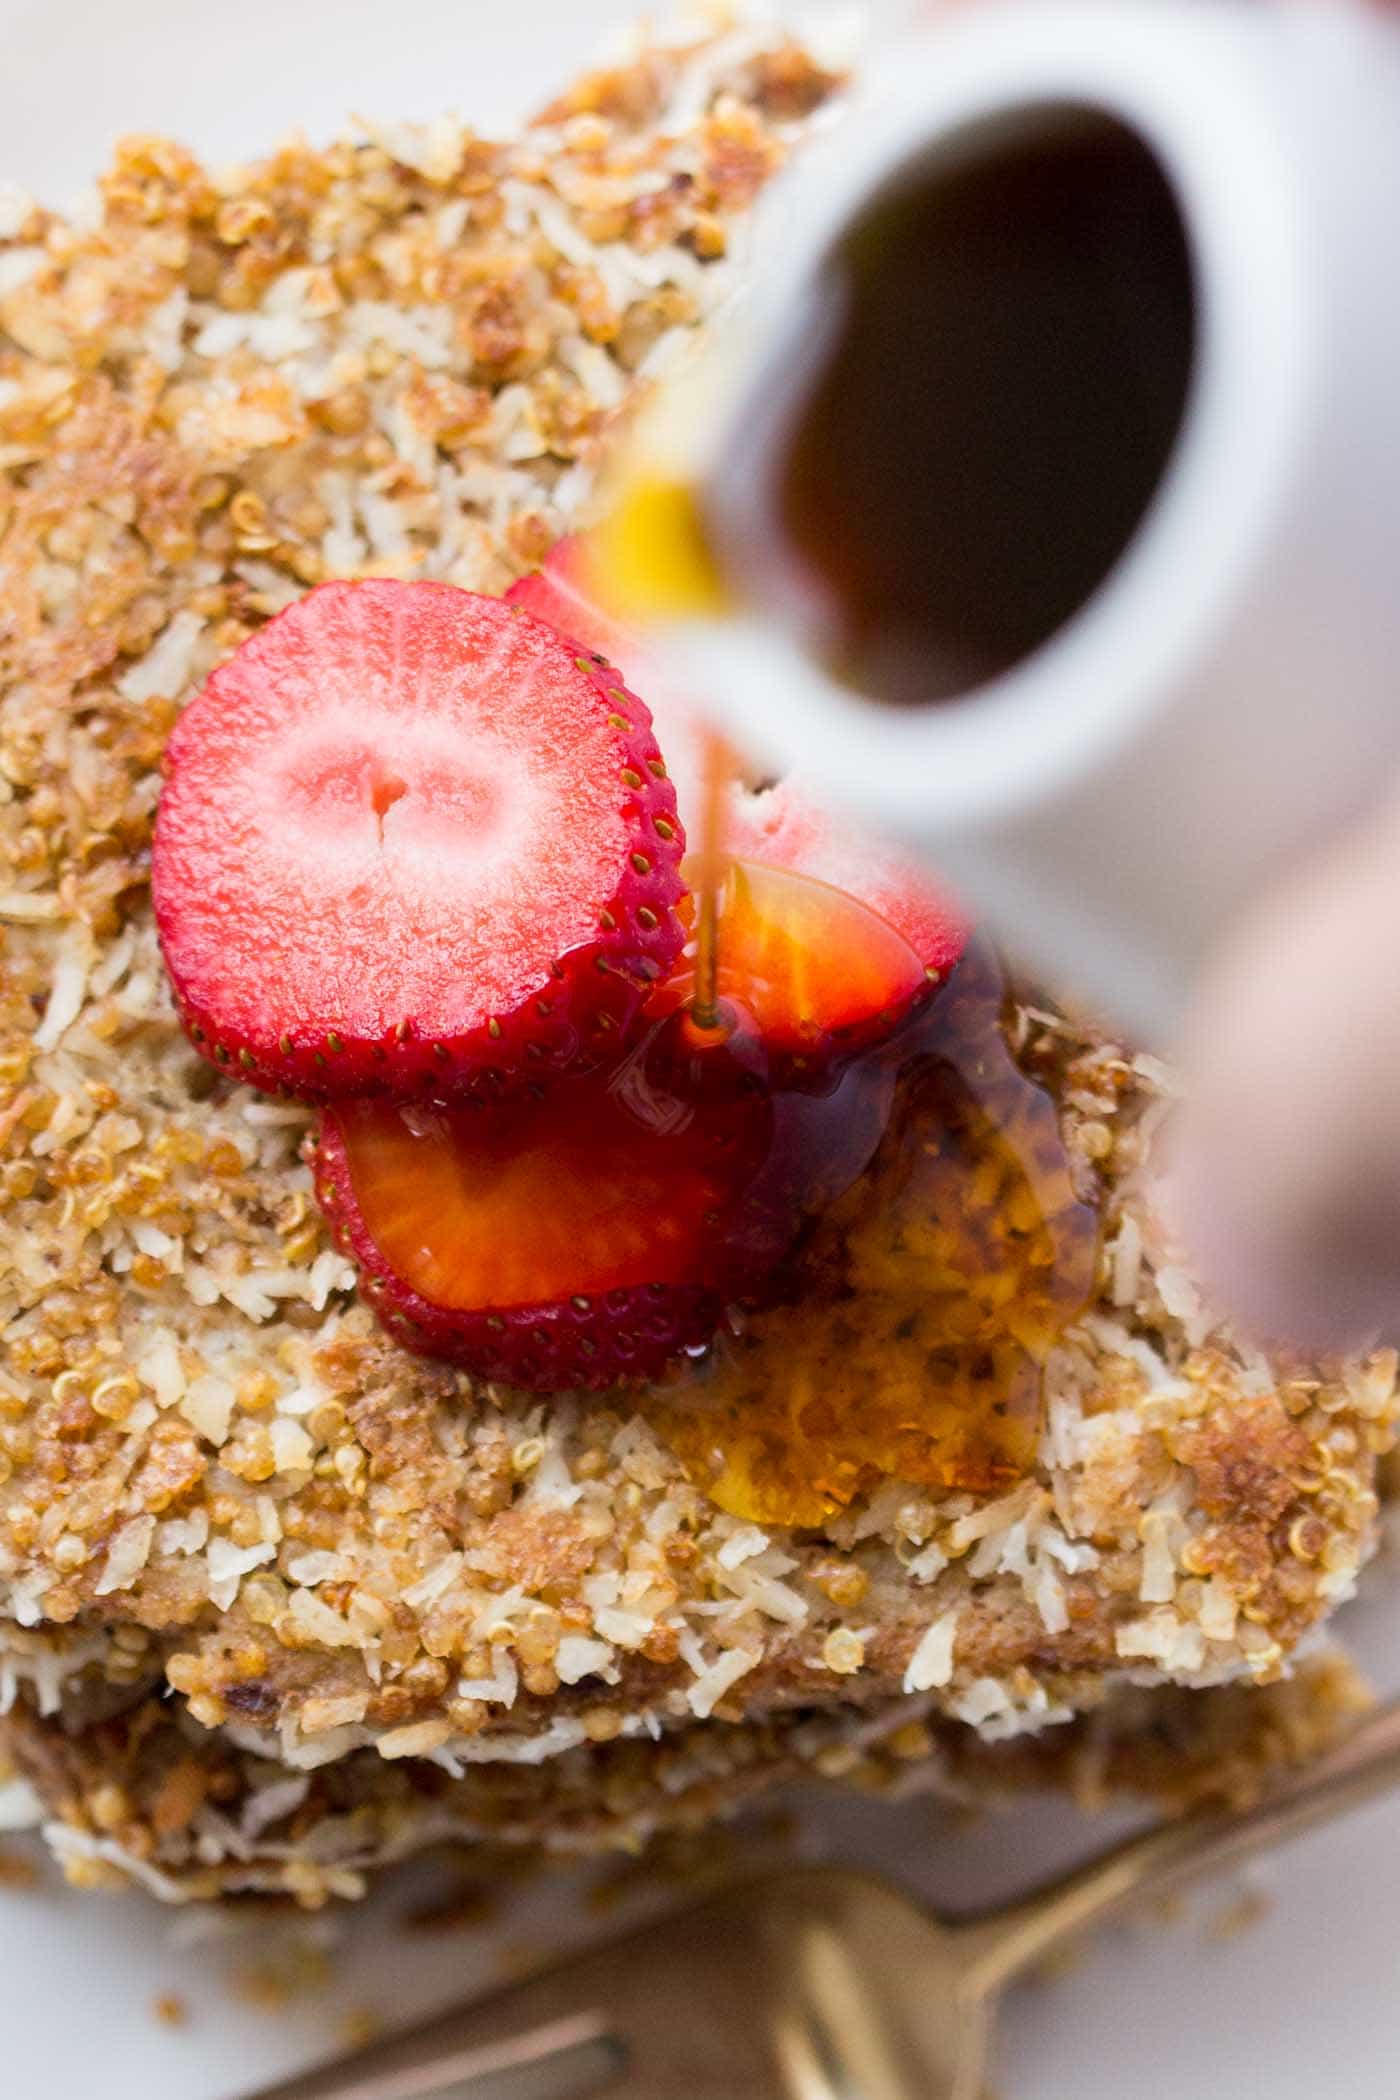 Coconut Vegan French Toast! Only 7 ingredients, super easy and HEALTHY! [gluten-free + vegan]